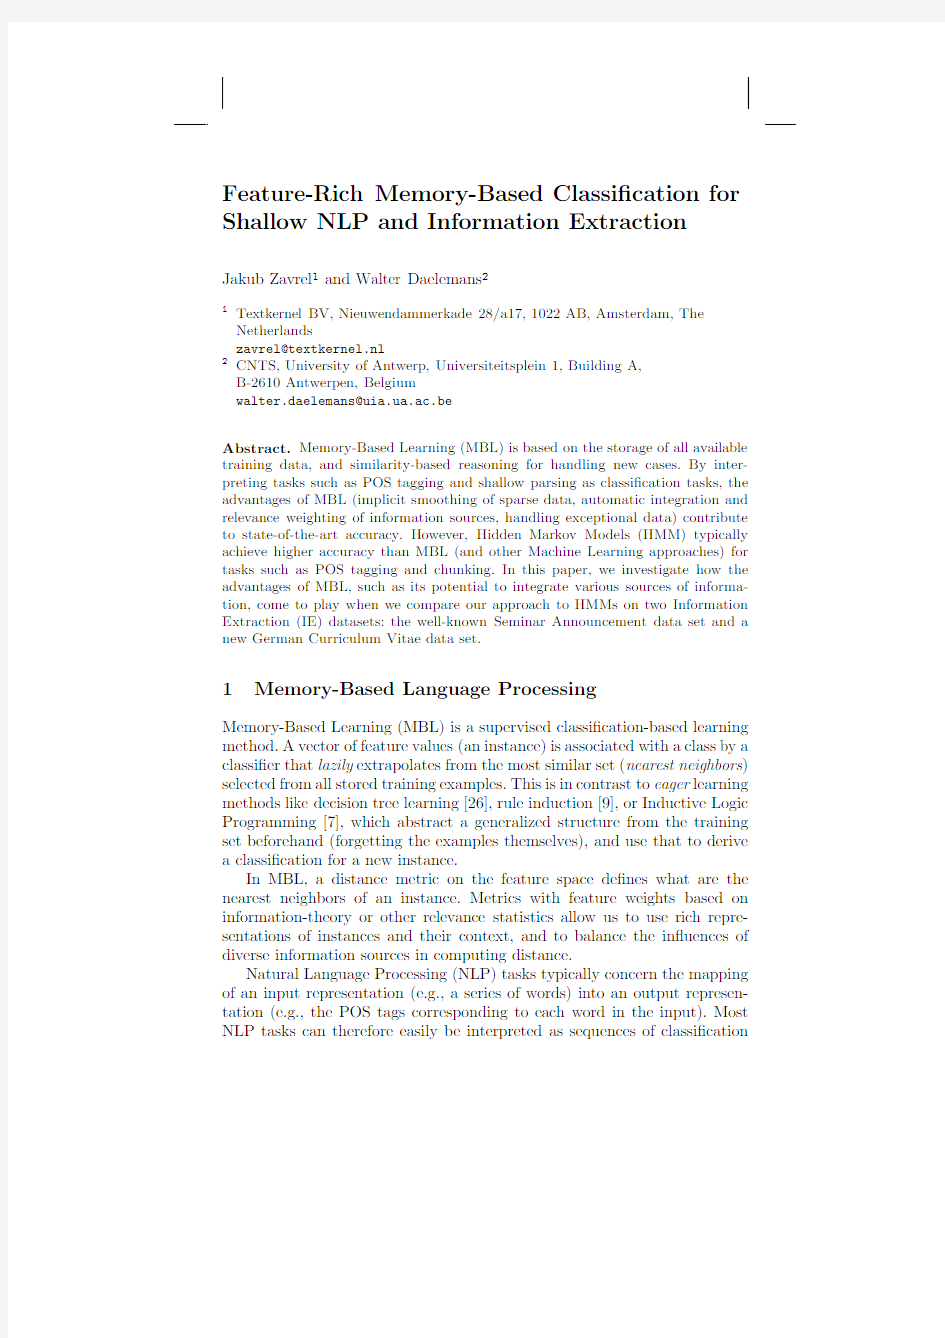 Feature-rich memory-based classification for shallow nlp and information extraction